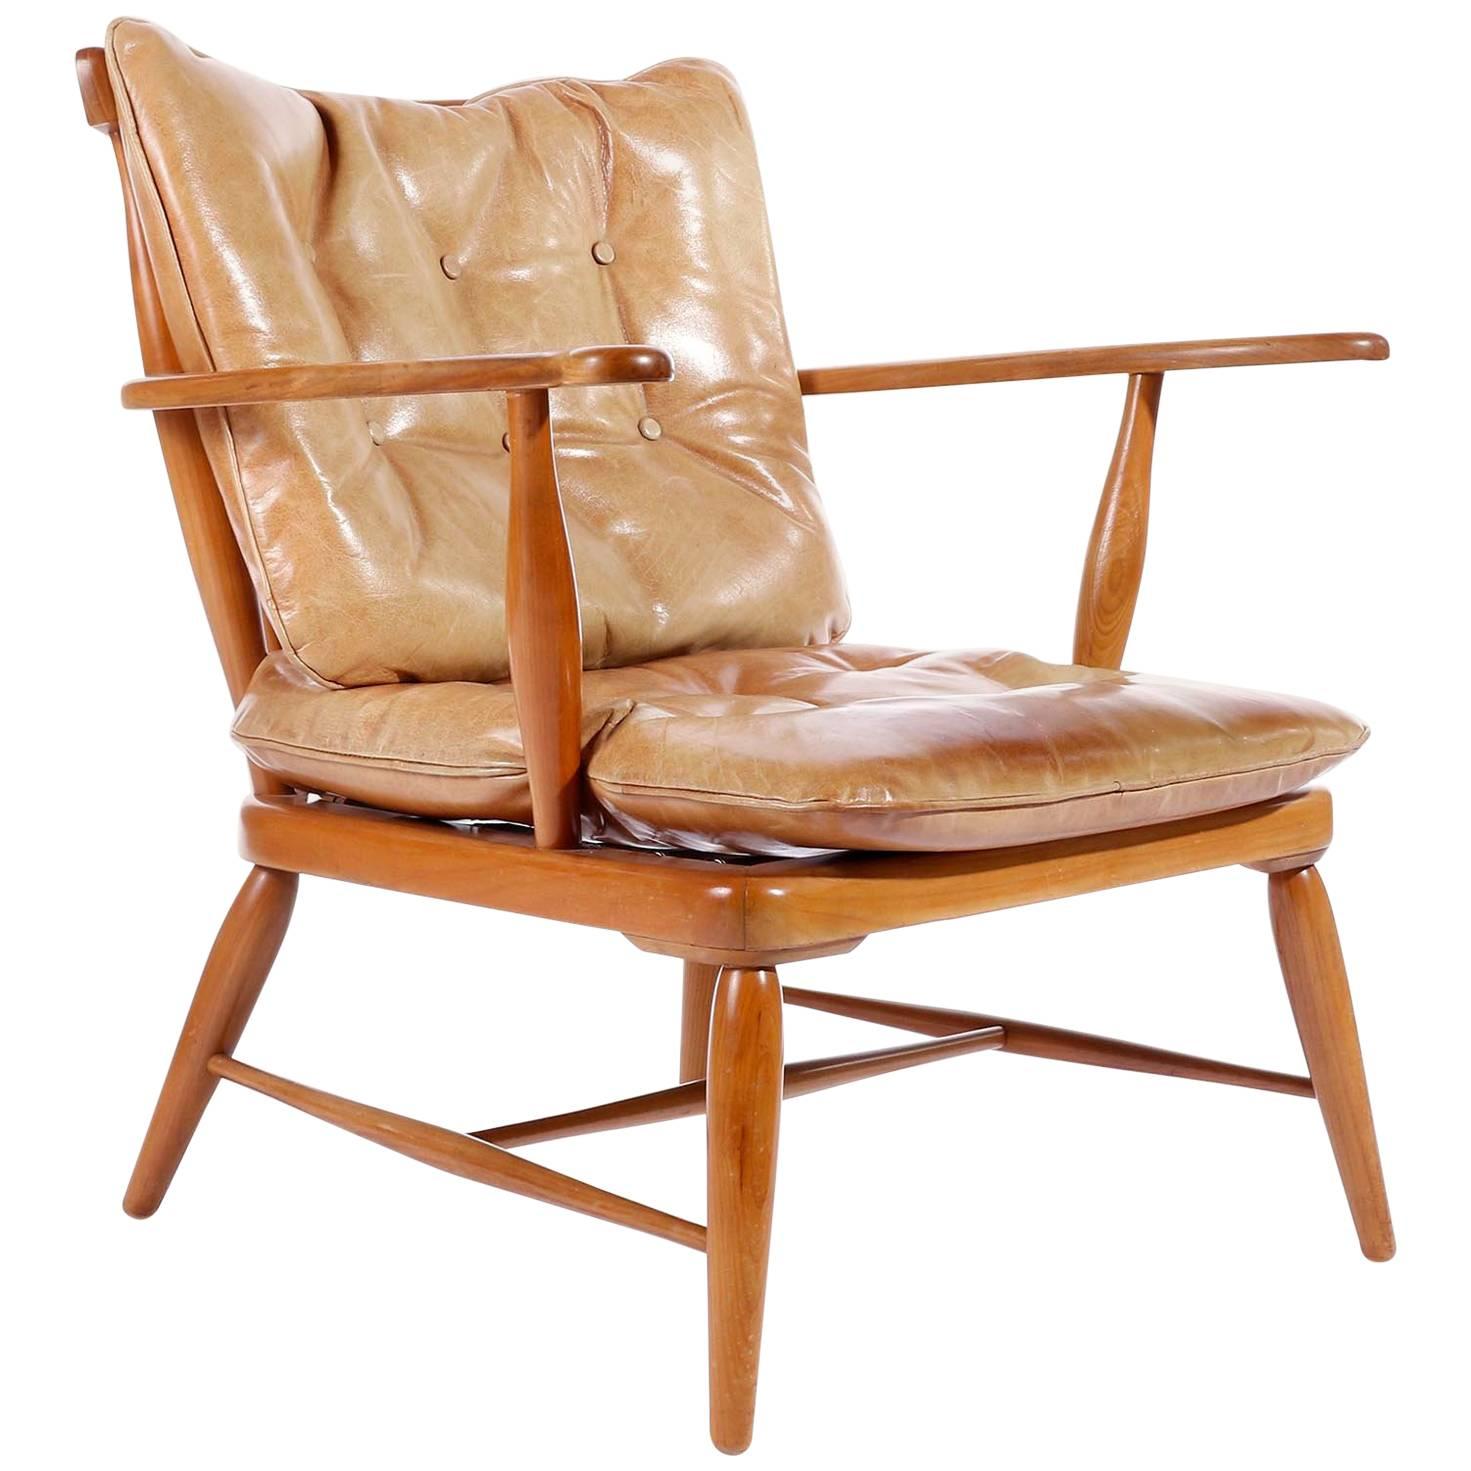 Mid-Century Modern, Arm Chair in Wood and Patinated Cognac Leather, 1950 For Sale